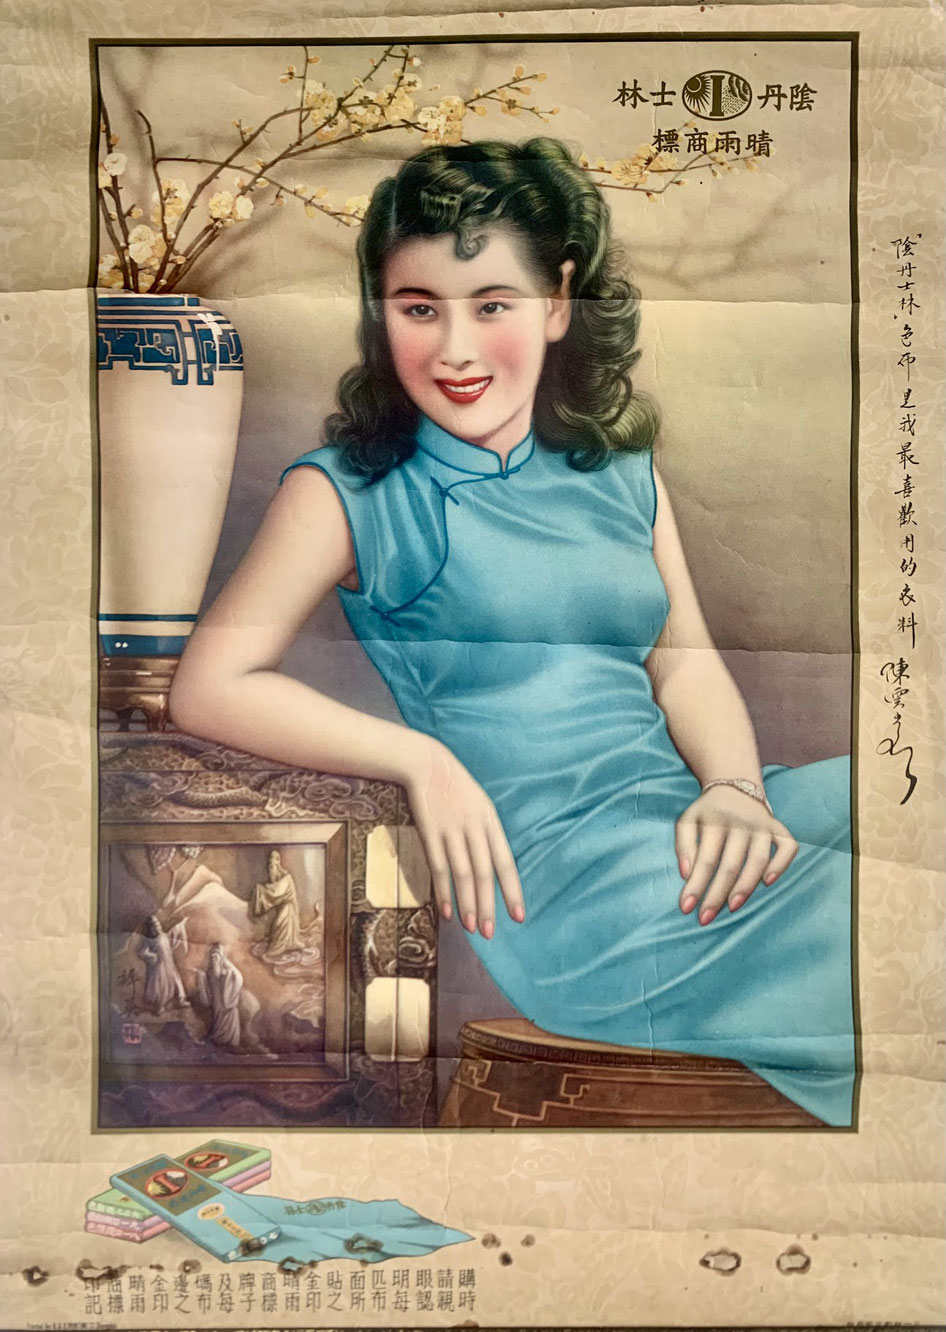 Original ca. 1940 BASF / I.G. Farben Chinese advertising poster for Indanthrene dye featuring actress Nancy Chan. From the MOFBA collection.